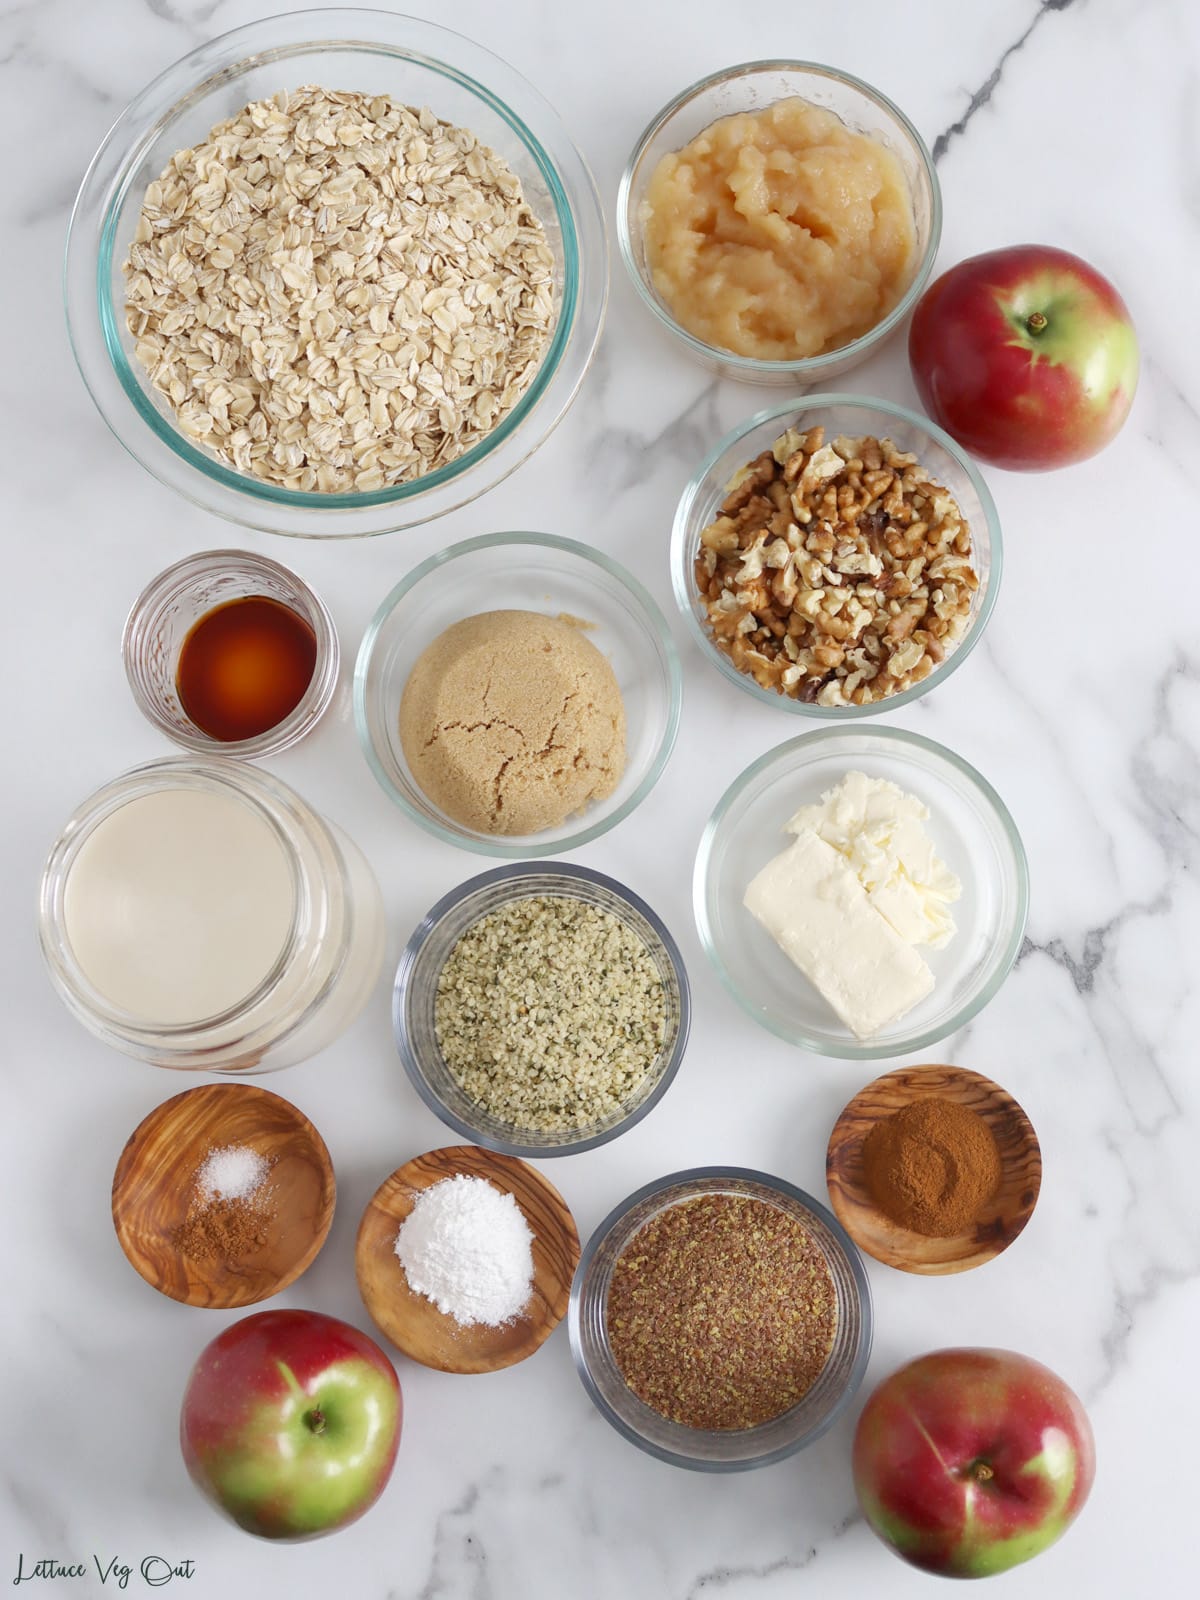 Arrangement of ingredients, in glass and wood dishes, for apple baked oatmeal.